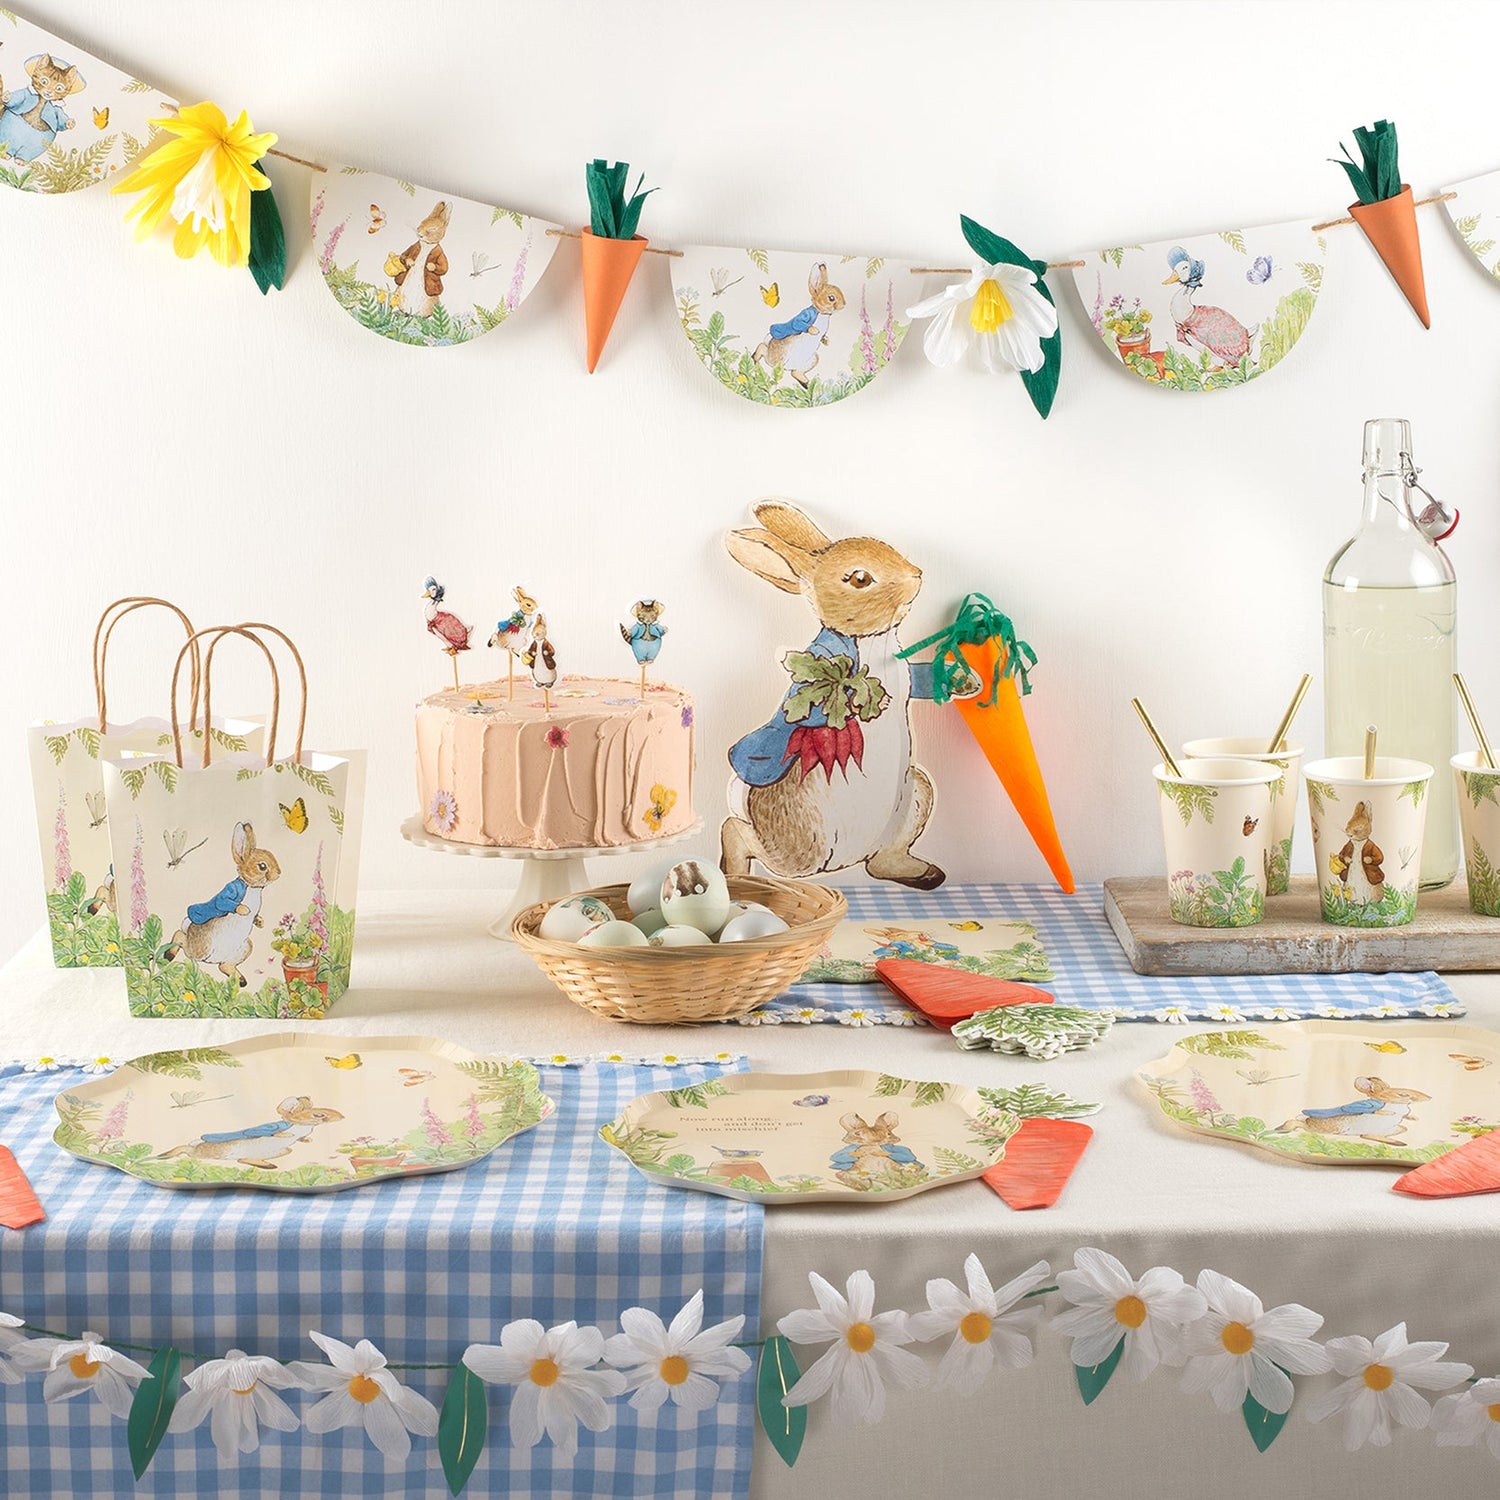 A festive table adorned with bunny decorations and Easter party supplies such as a Meri Meri Peter Rabbit in the Garden Garland and party centerpiece.